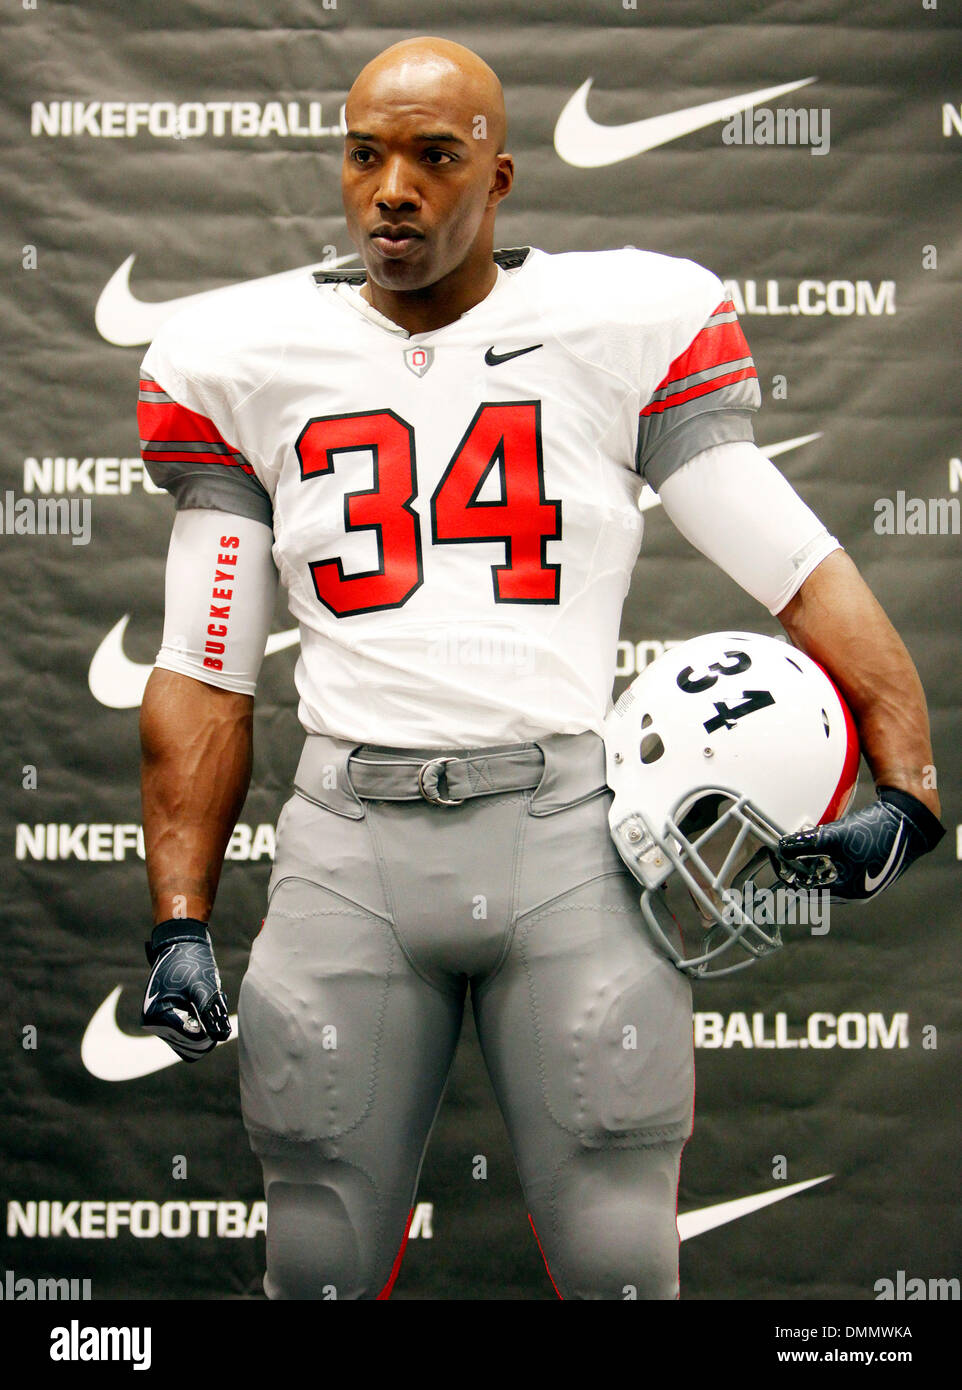 Nov 16, 2009 - Columbus, Ohio, USA - Former Ohio State running back RAYMONT  HARRIS wears the Buckeye's new Nike Pro Uniform was on display at Ohio  Stadium during a press conference